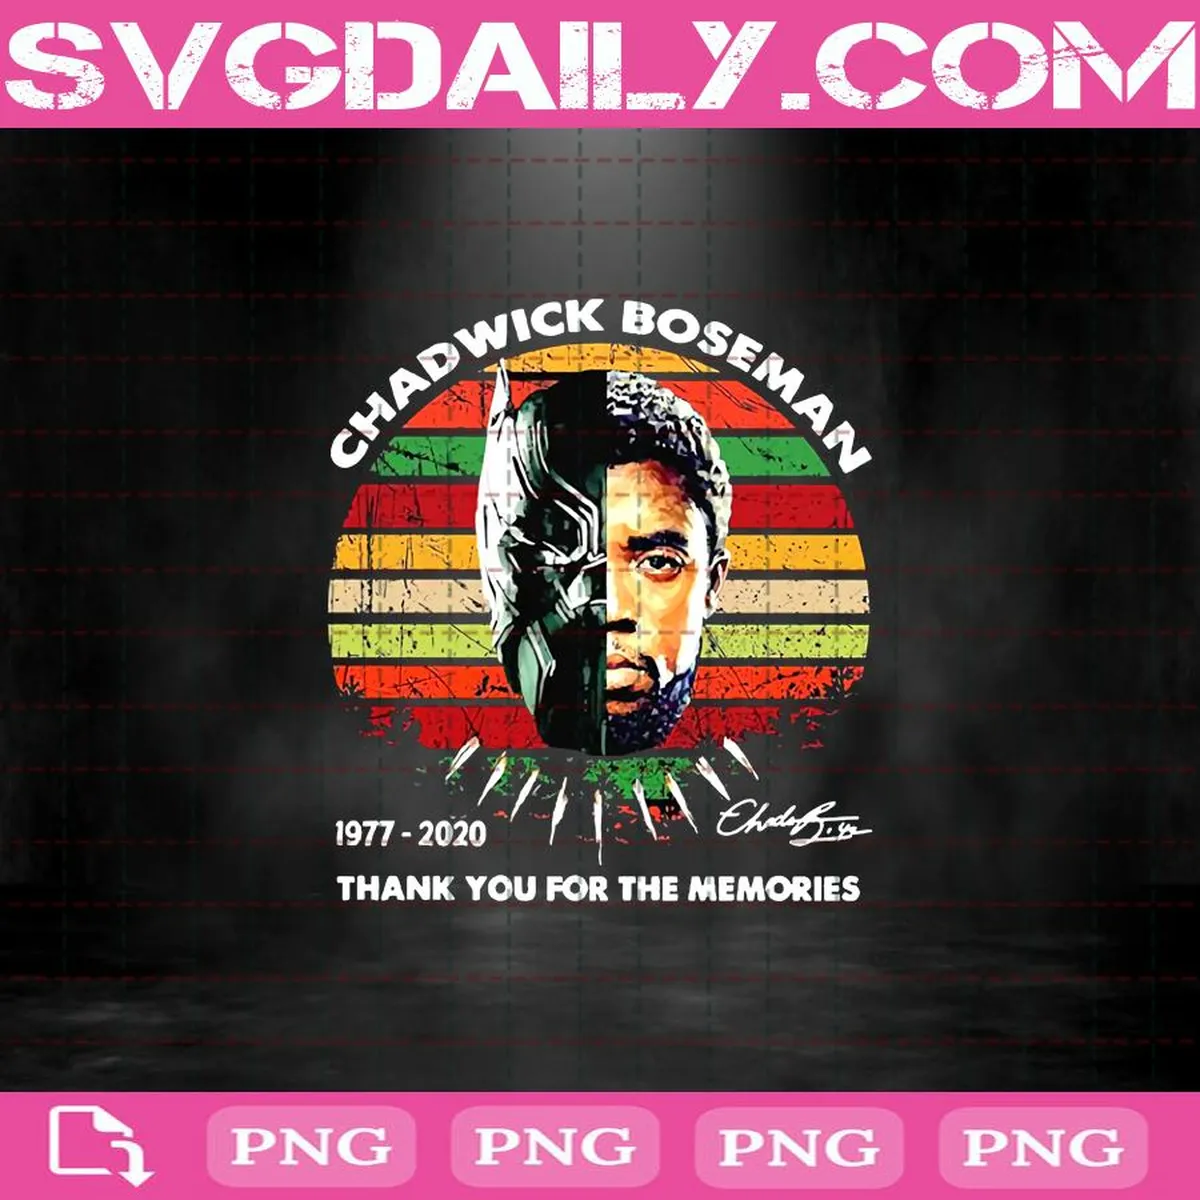 Chadwick Boseman 1977-2020 Thank You For The Memories Png, Black Panther Png, Chadwick Boseman Png, Cricut Digital Download, Instant Download